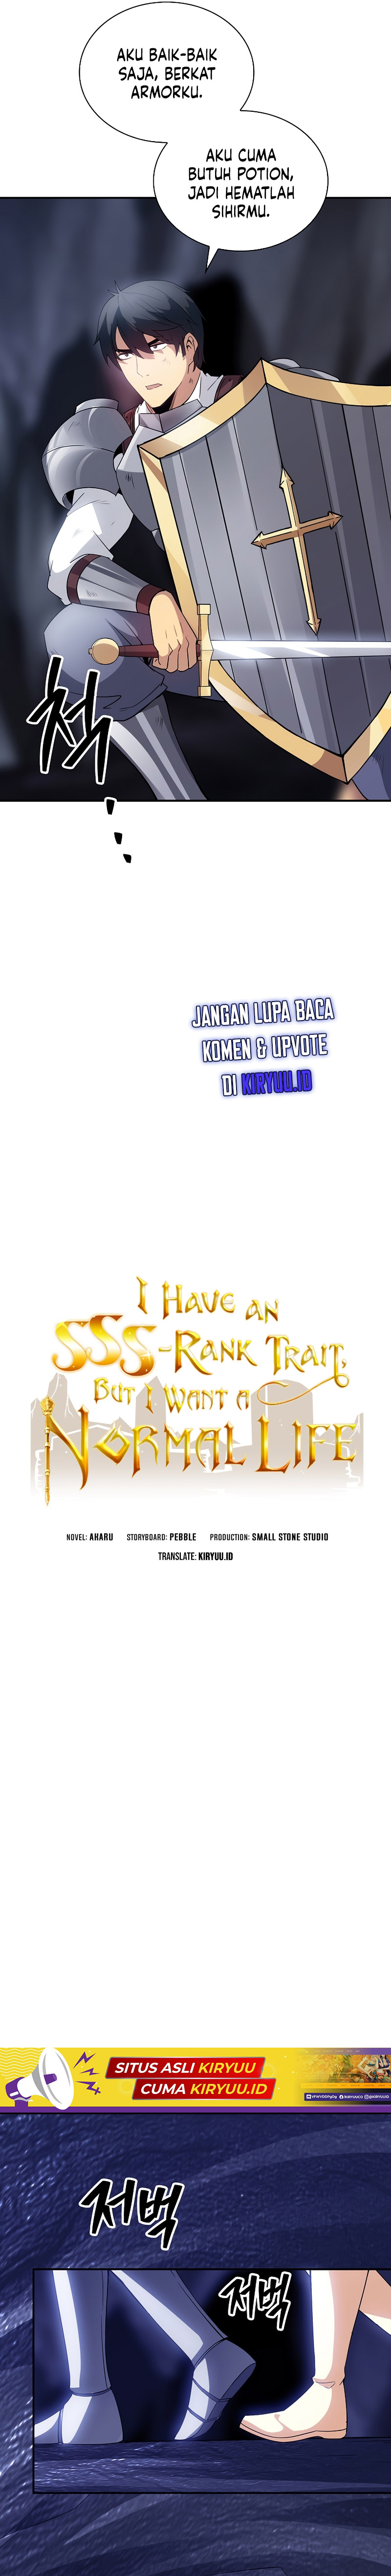 I have an SSS-rank Trait, but I want a Normal Life Chapter 27 Image 6